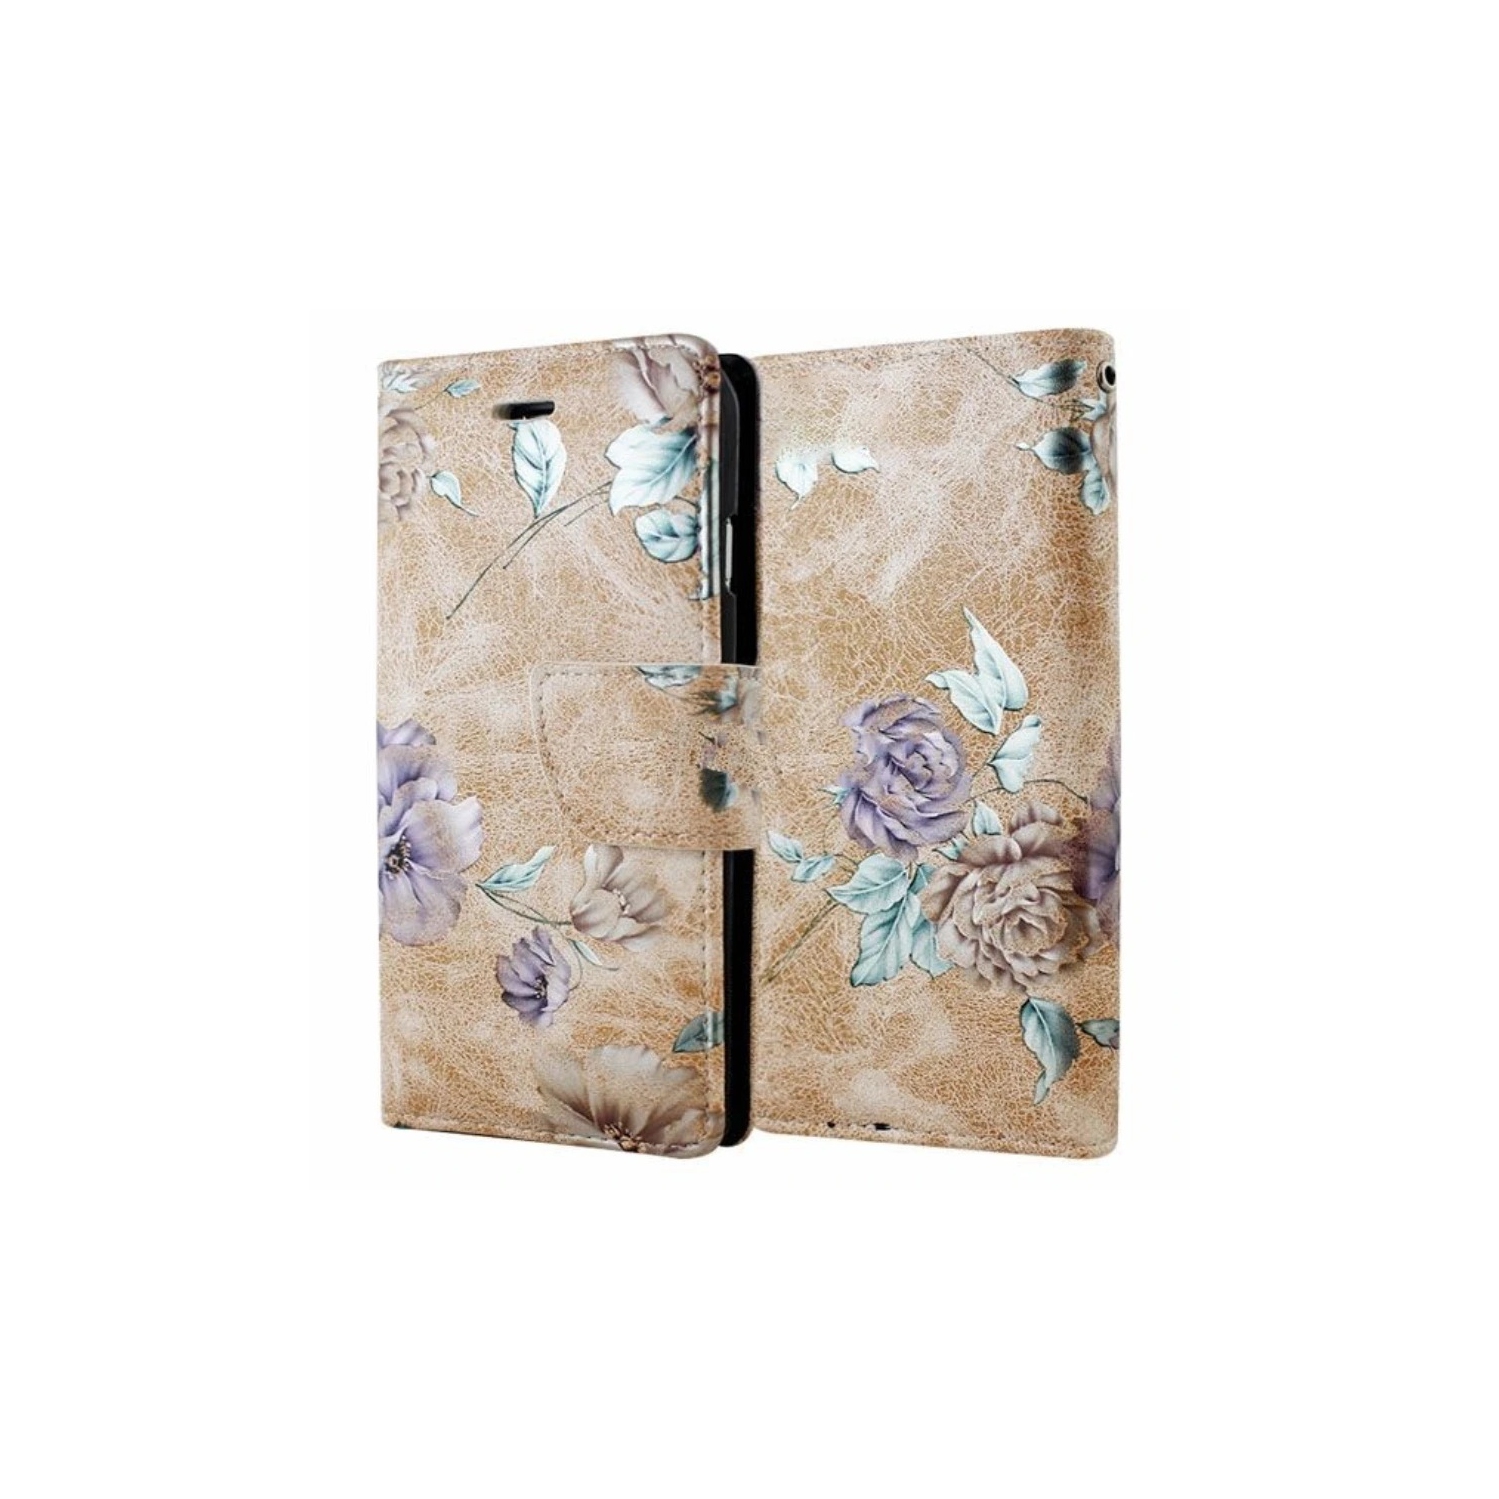 【CSmart】 Magnetic Card Slot Leather Folio Wallet Flip Case Cover for Samsung Galaxy A21, Beige Flower